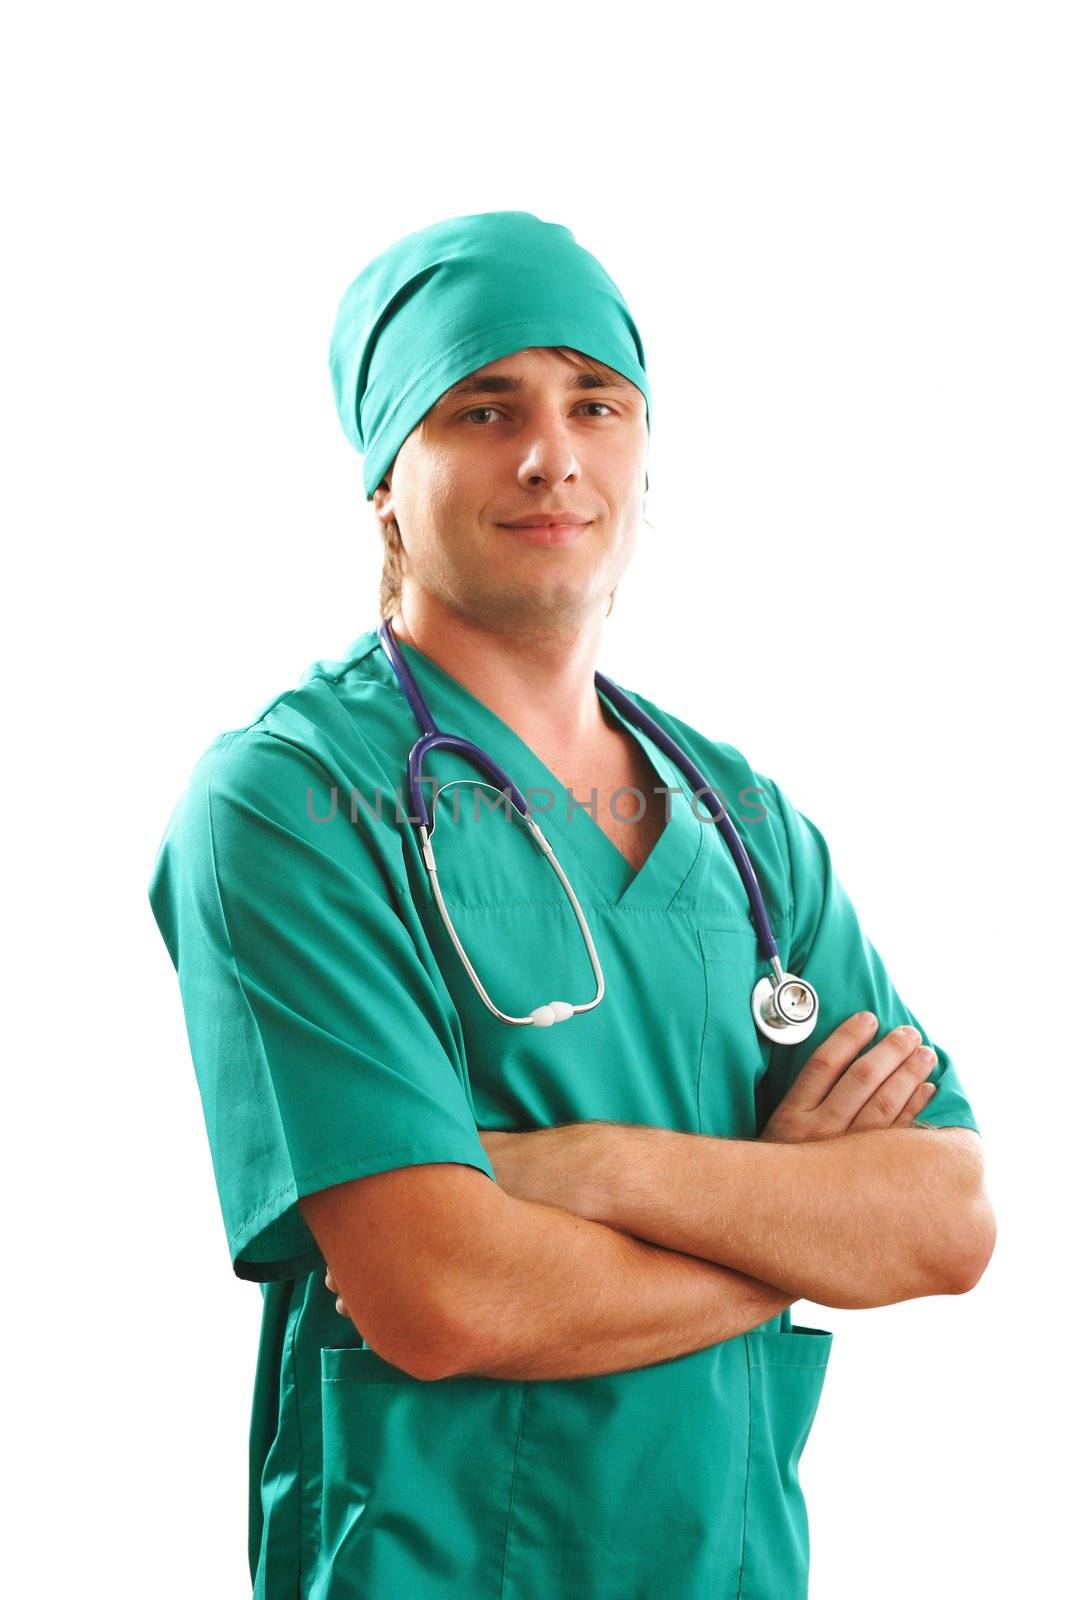 Doctor with stethoscope over white